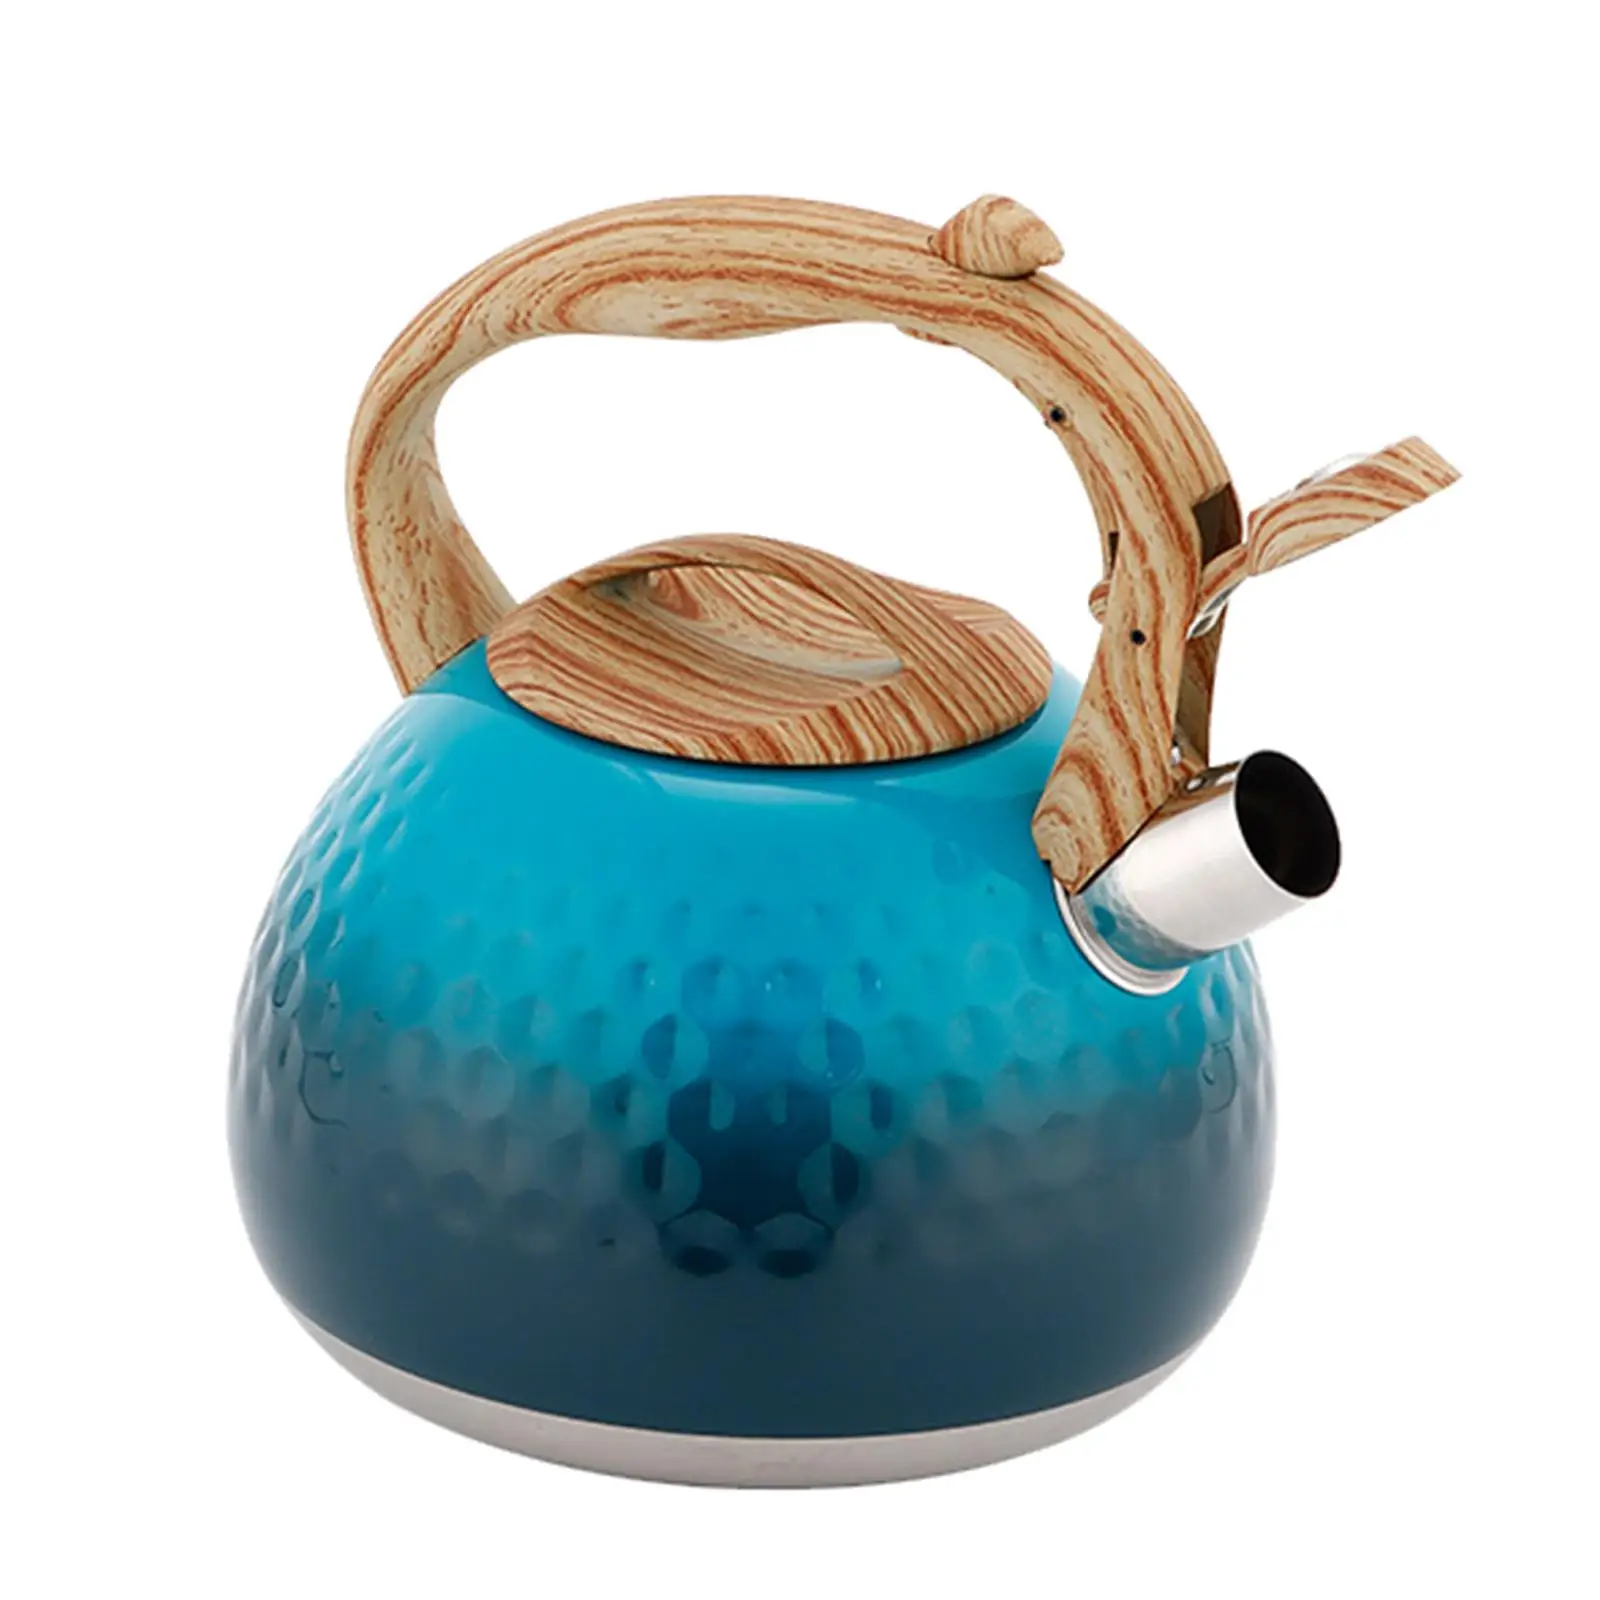 3 Pattern Teapot Whistle Water Kettle with Wooden Grain Handle Cookware for Electric Cooktop Professional Lightweight Durable